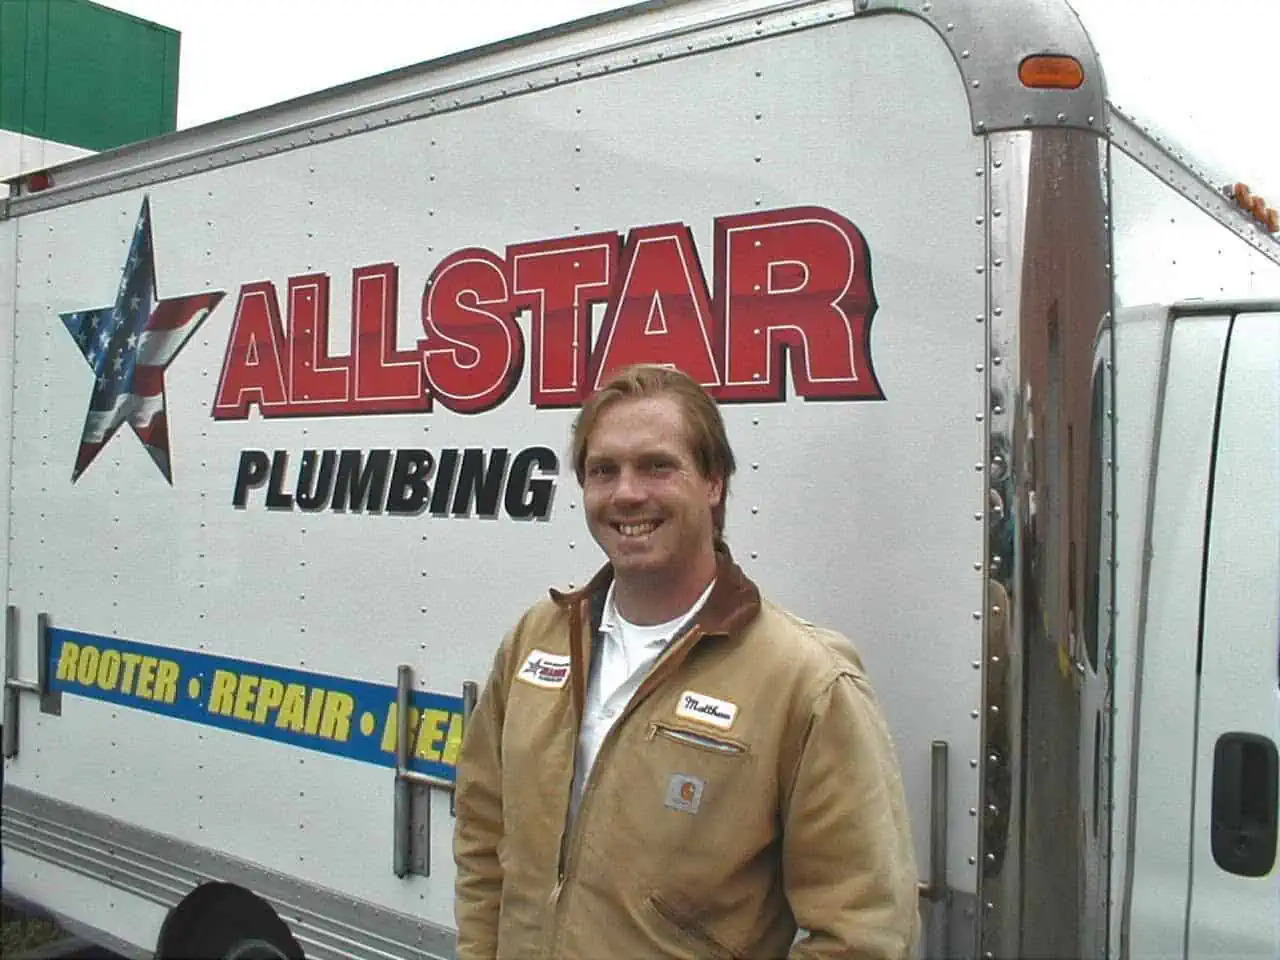 Allstar Plumbing provides top-notch plumbing services to the San Jose community, specializing in both residential and commercial plumbing solutions.